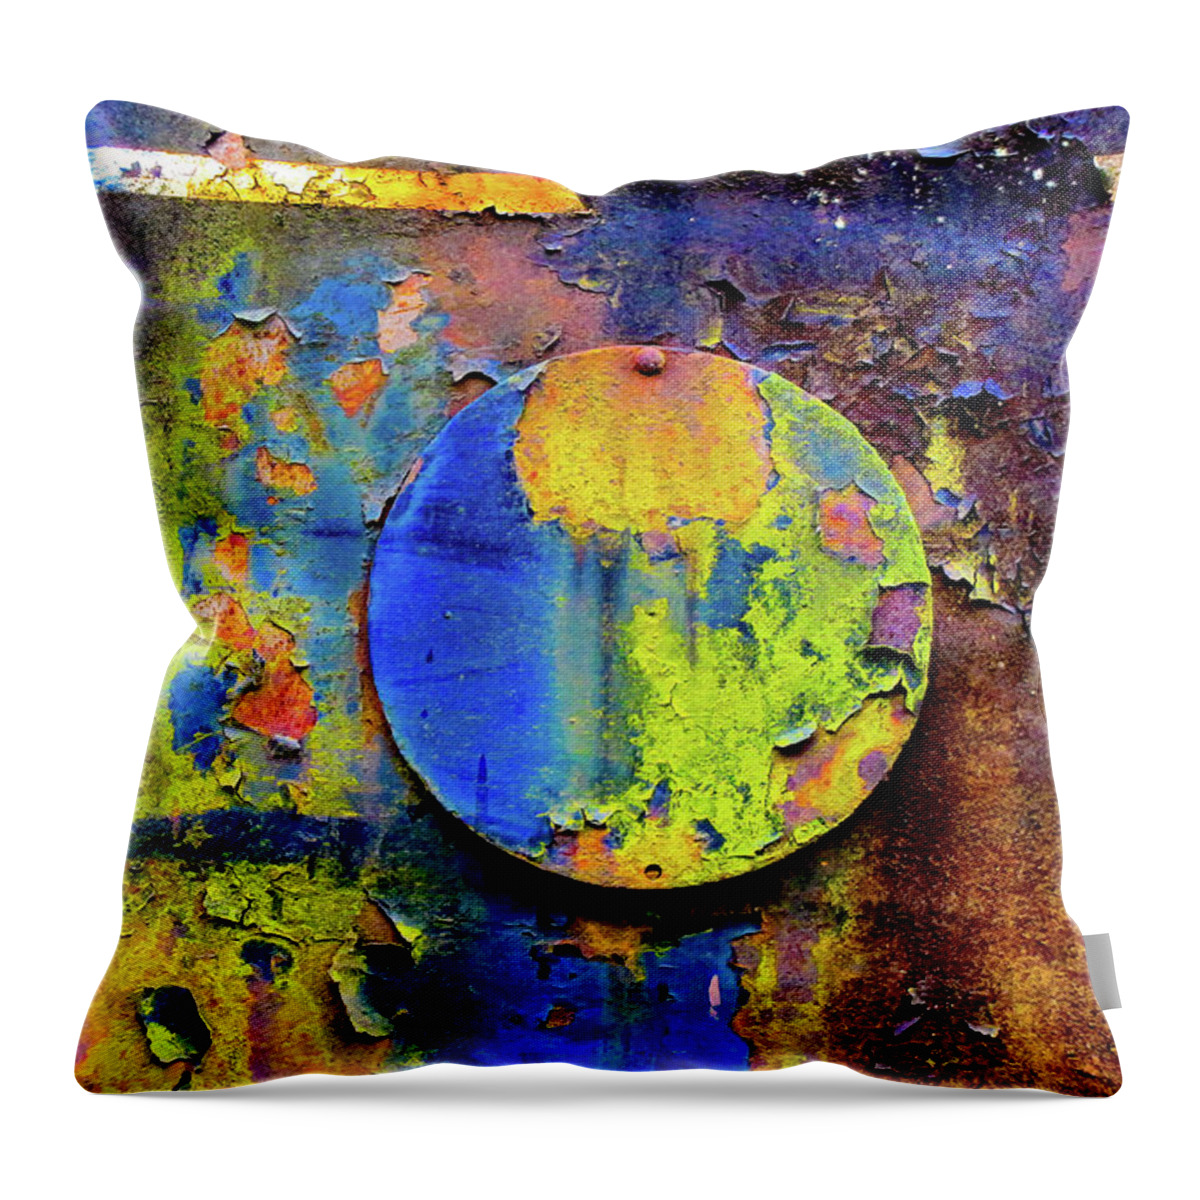 Northwest Railway Museum Throw Pillow featuring the photograph World View by Larey McDaniel